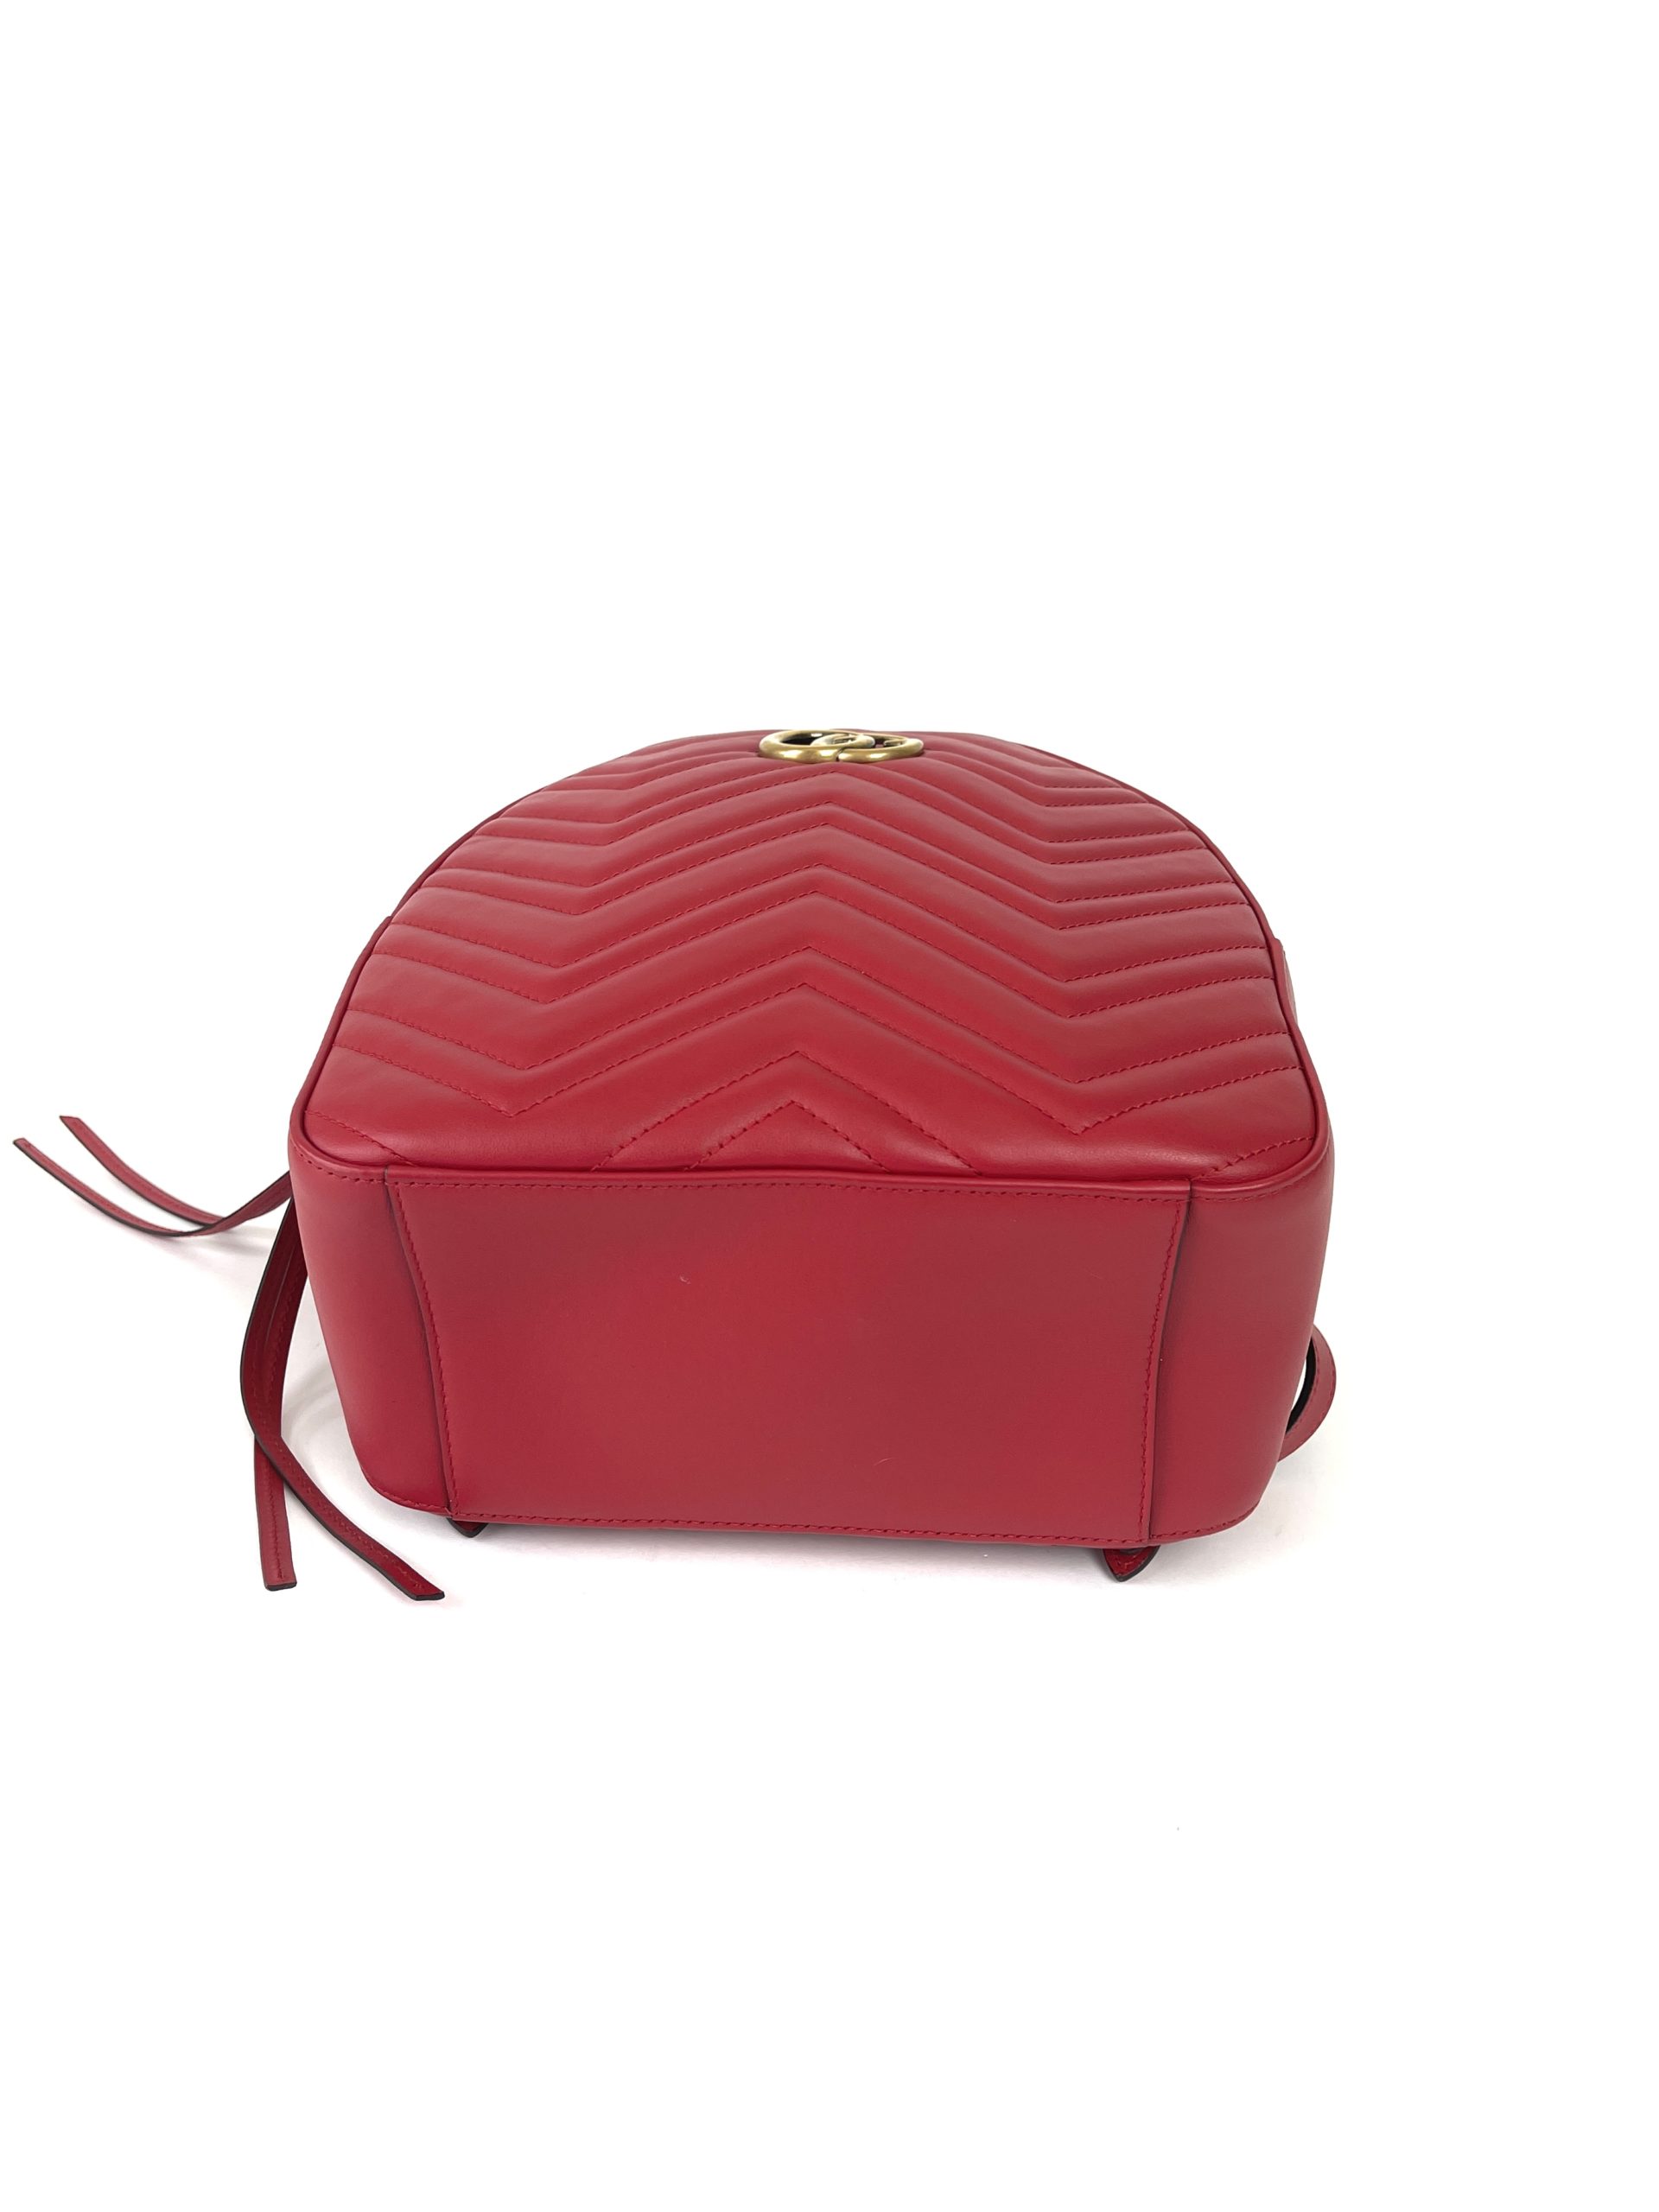 Gucci Red Chevron Leather Marmont Backpack Bag - Yoogi's Closet